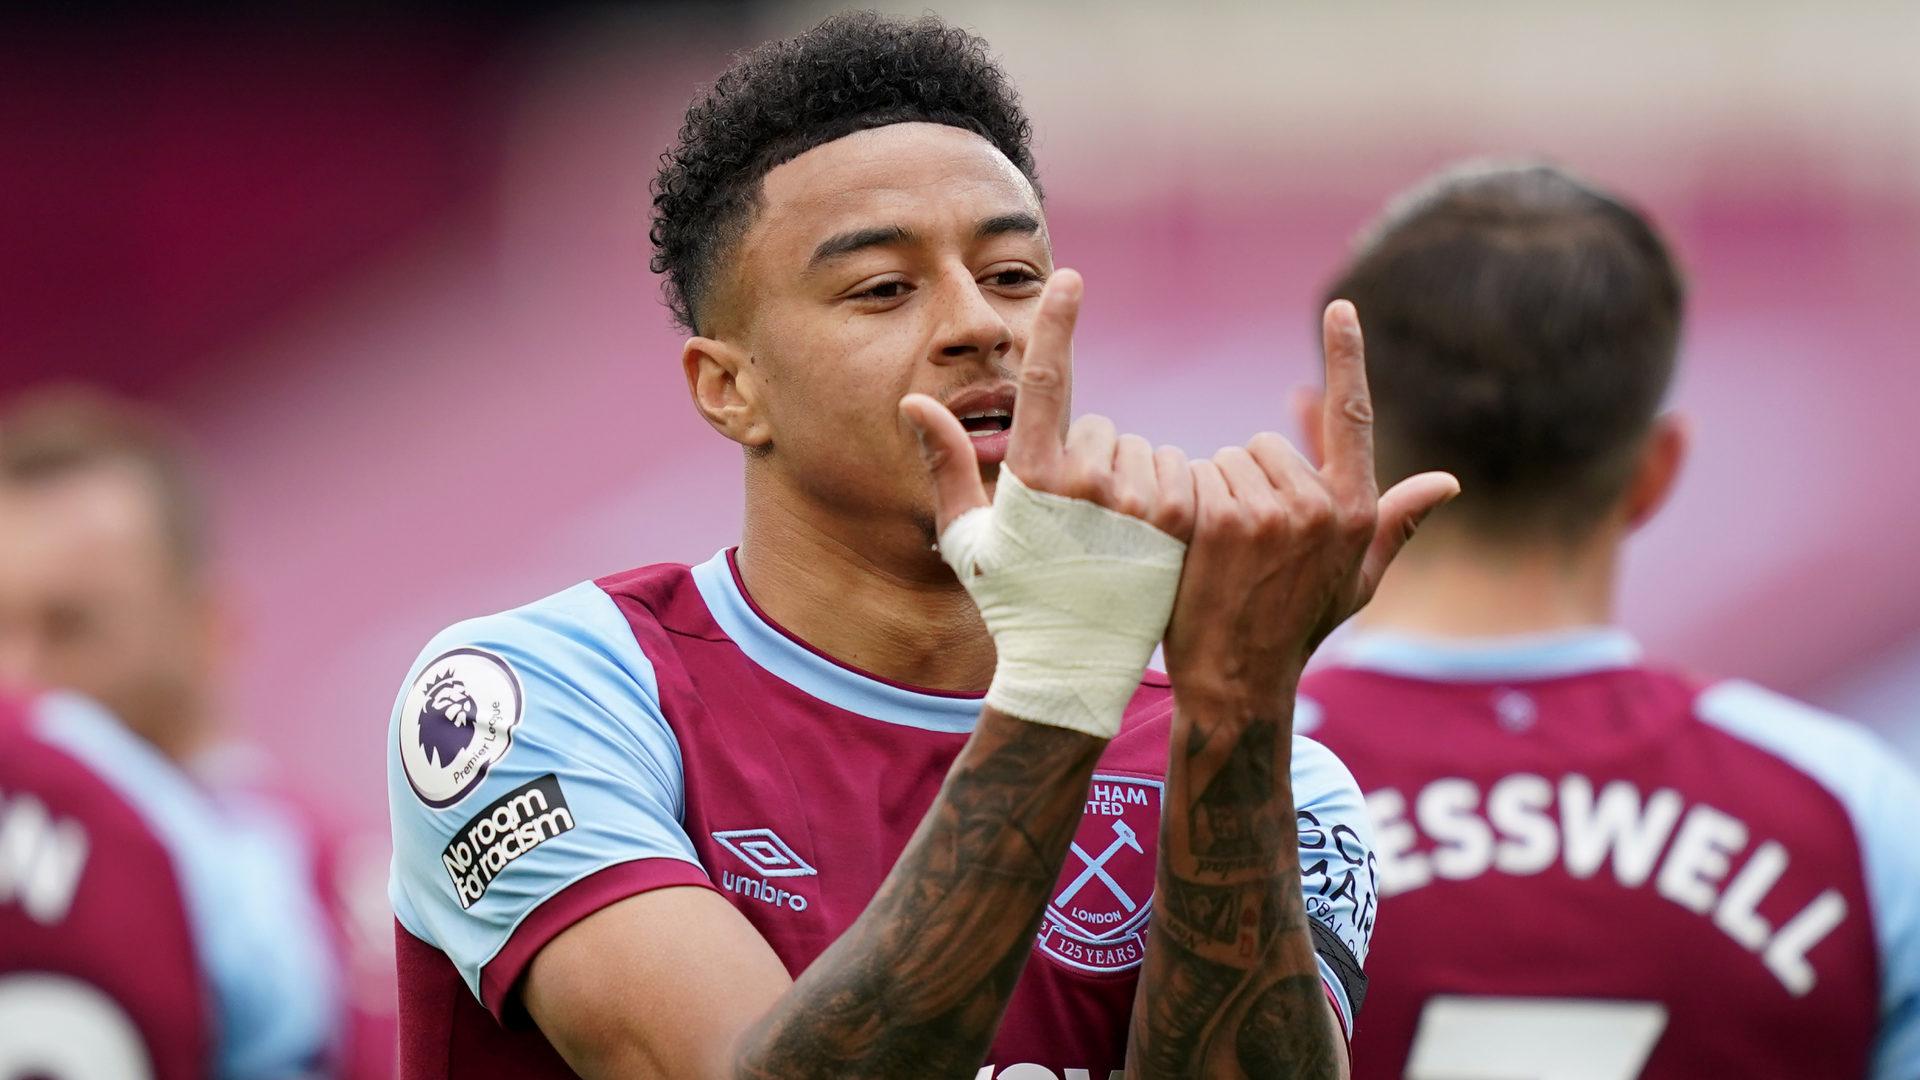 Revealed: How Jesse Lingard cost West Ham thousands of pounds during unsuccessful trial as club funded hotel room and all travel costs